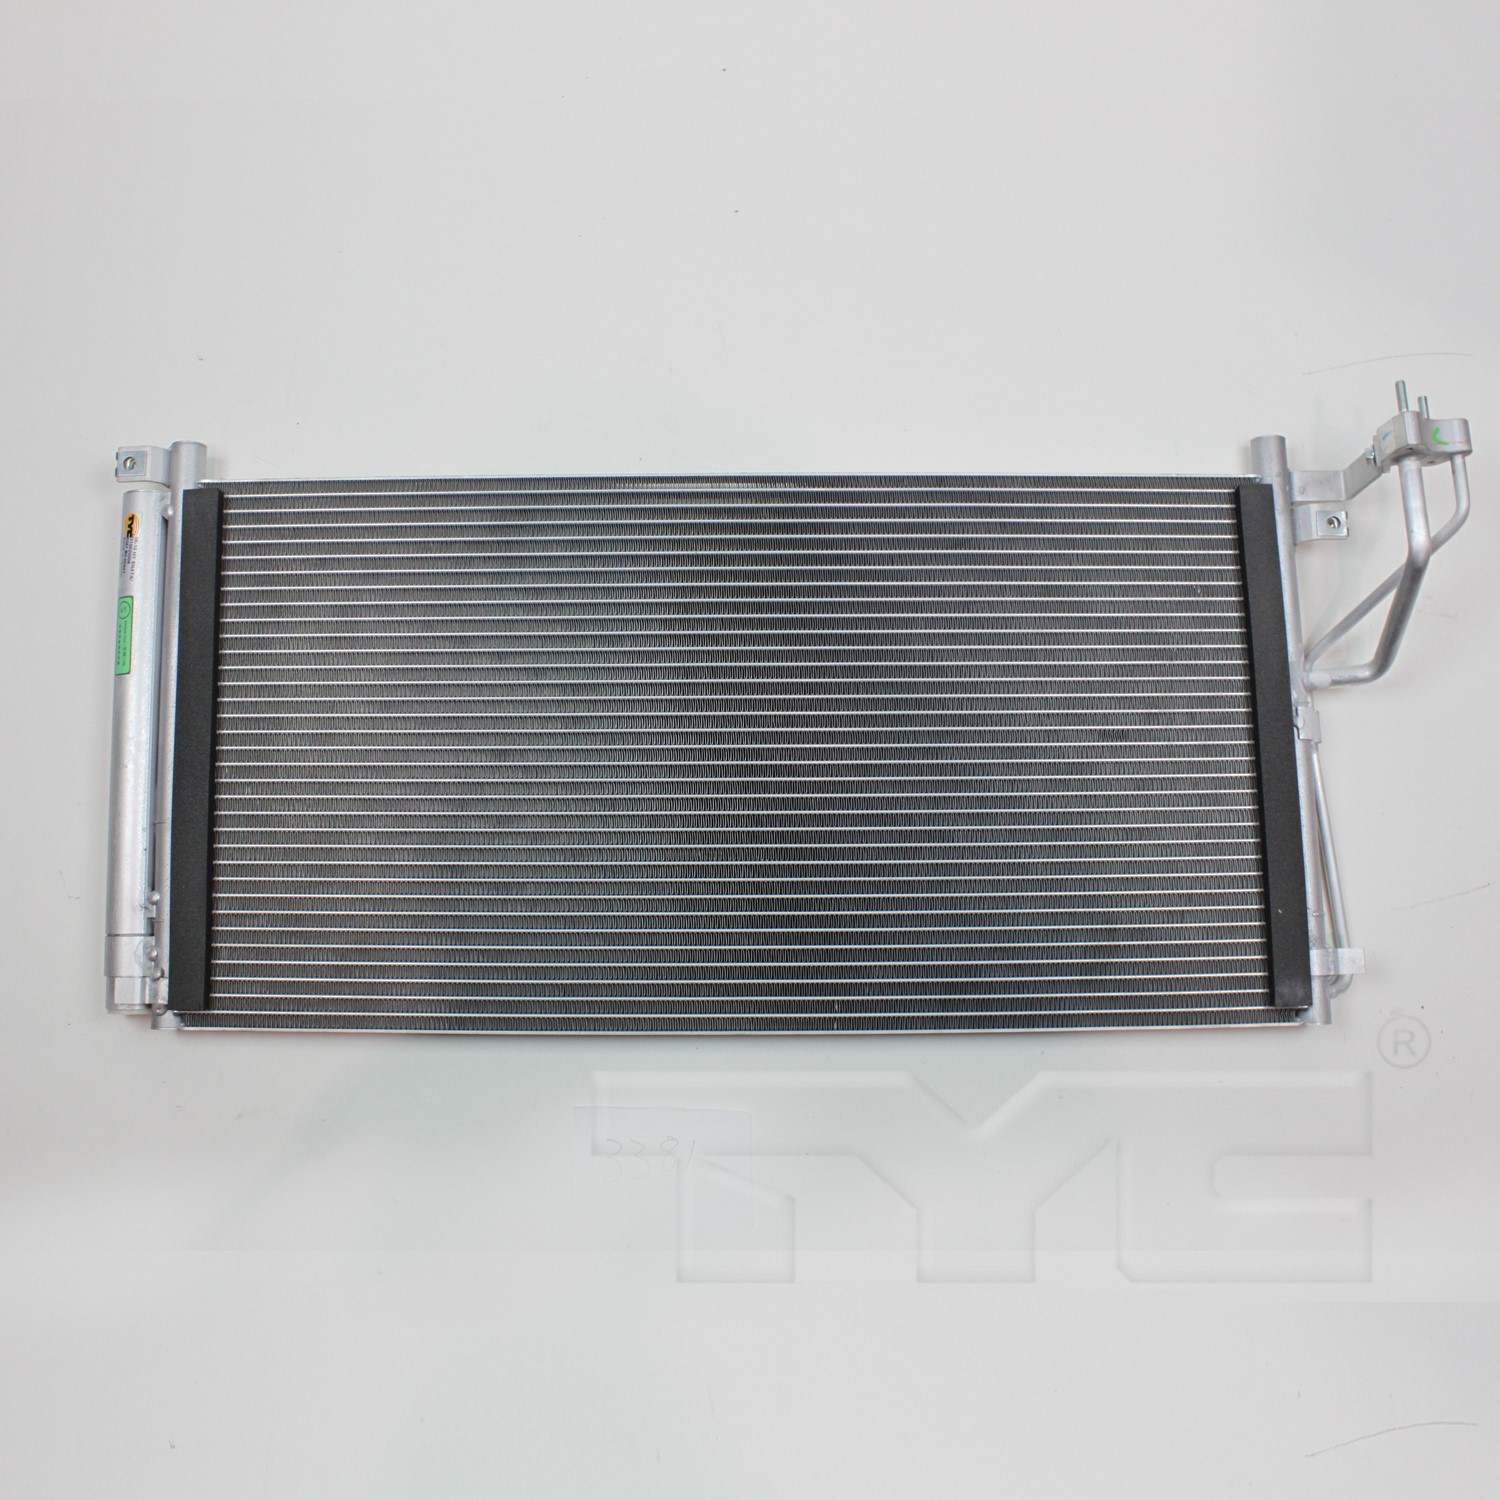 Aftermarket AC CONDENSERS for KIA - OPTIMA, OPTIMA,06-10,Air conditioning condenser